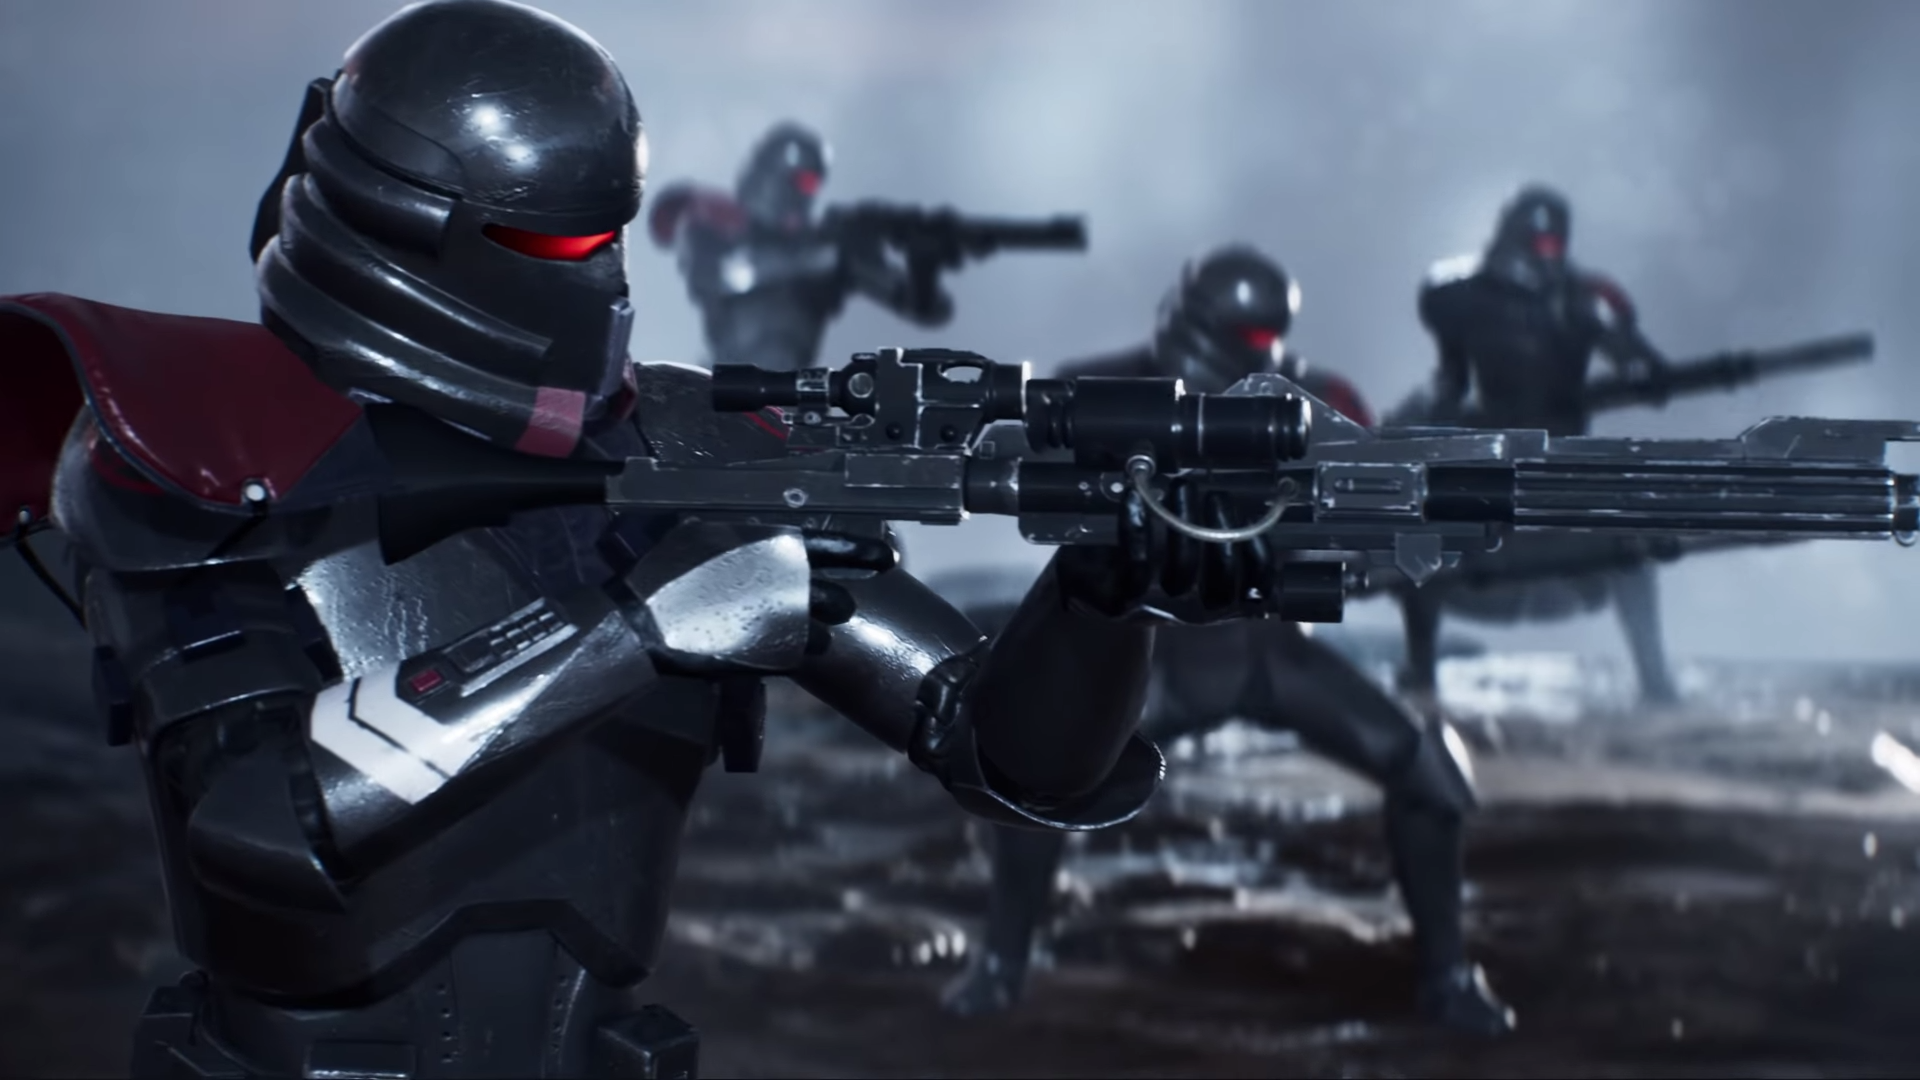 Star Wars Jedi: Fallen Order Gets An Awesome New Trailer